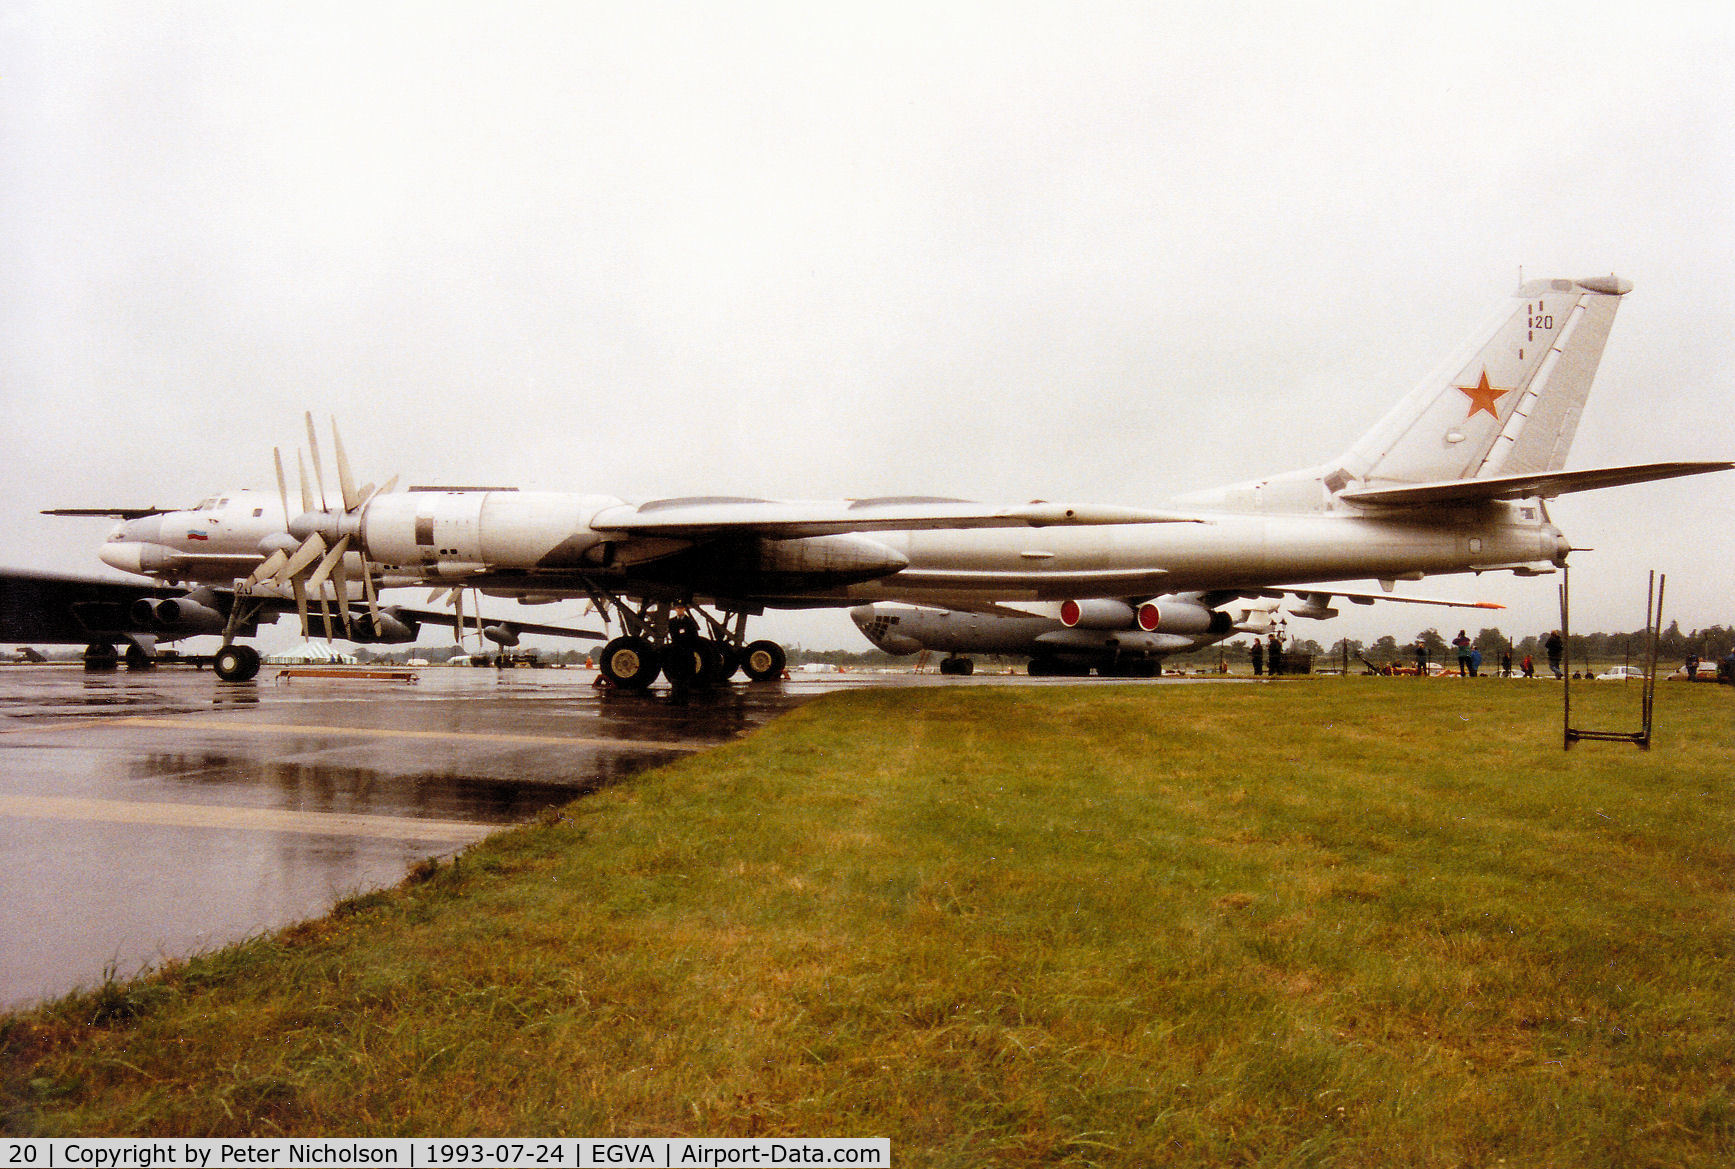 20, Tupolev Tu-95MS C/N 34108, Another view of the Bear H, callsign Limon 11, from the 182nd Heavy Bomber Regiment based at Mosdok on display at the 1993 Intnl Air Tattoo at RAF Fairford.